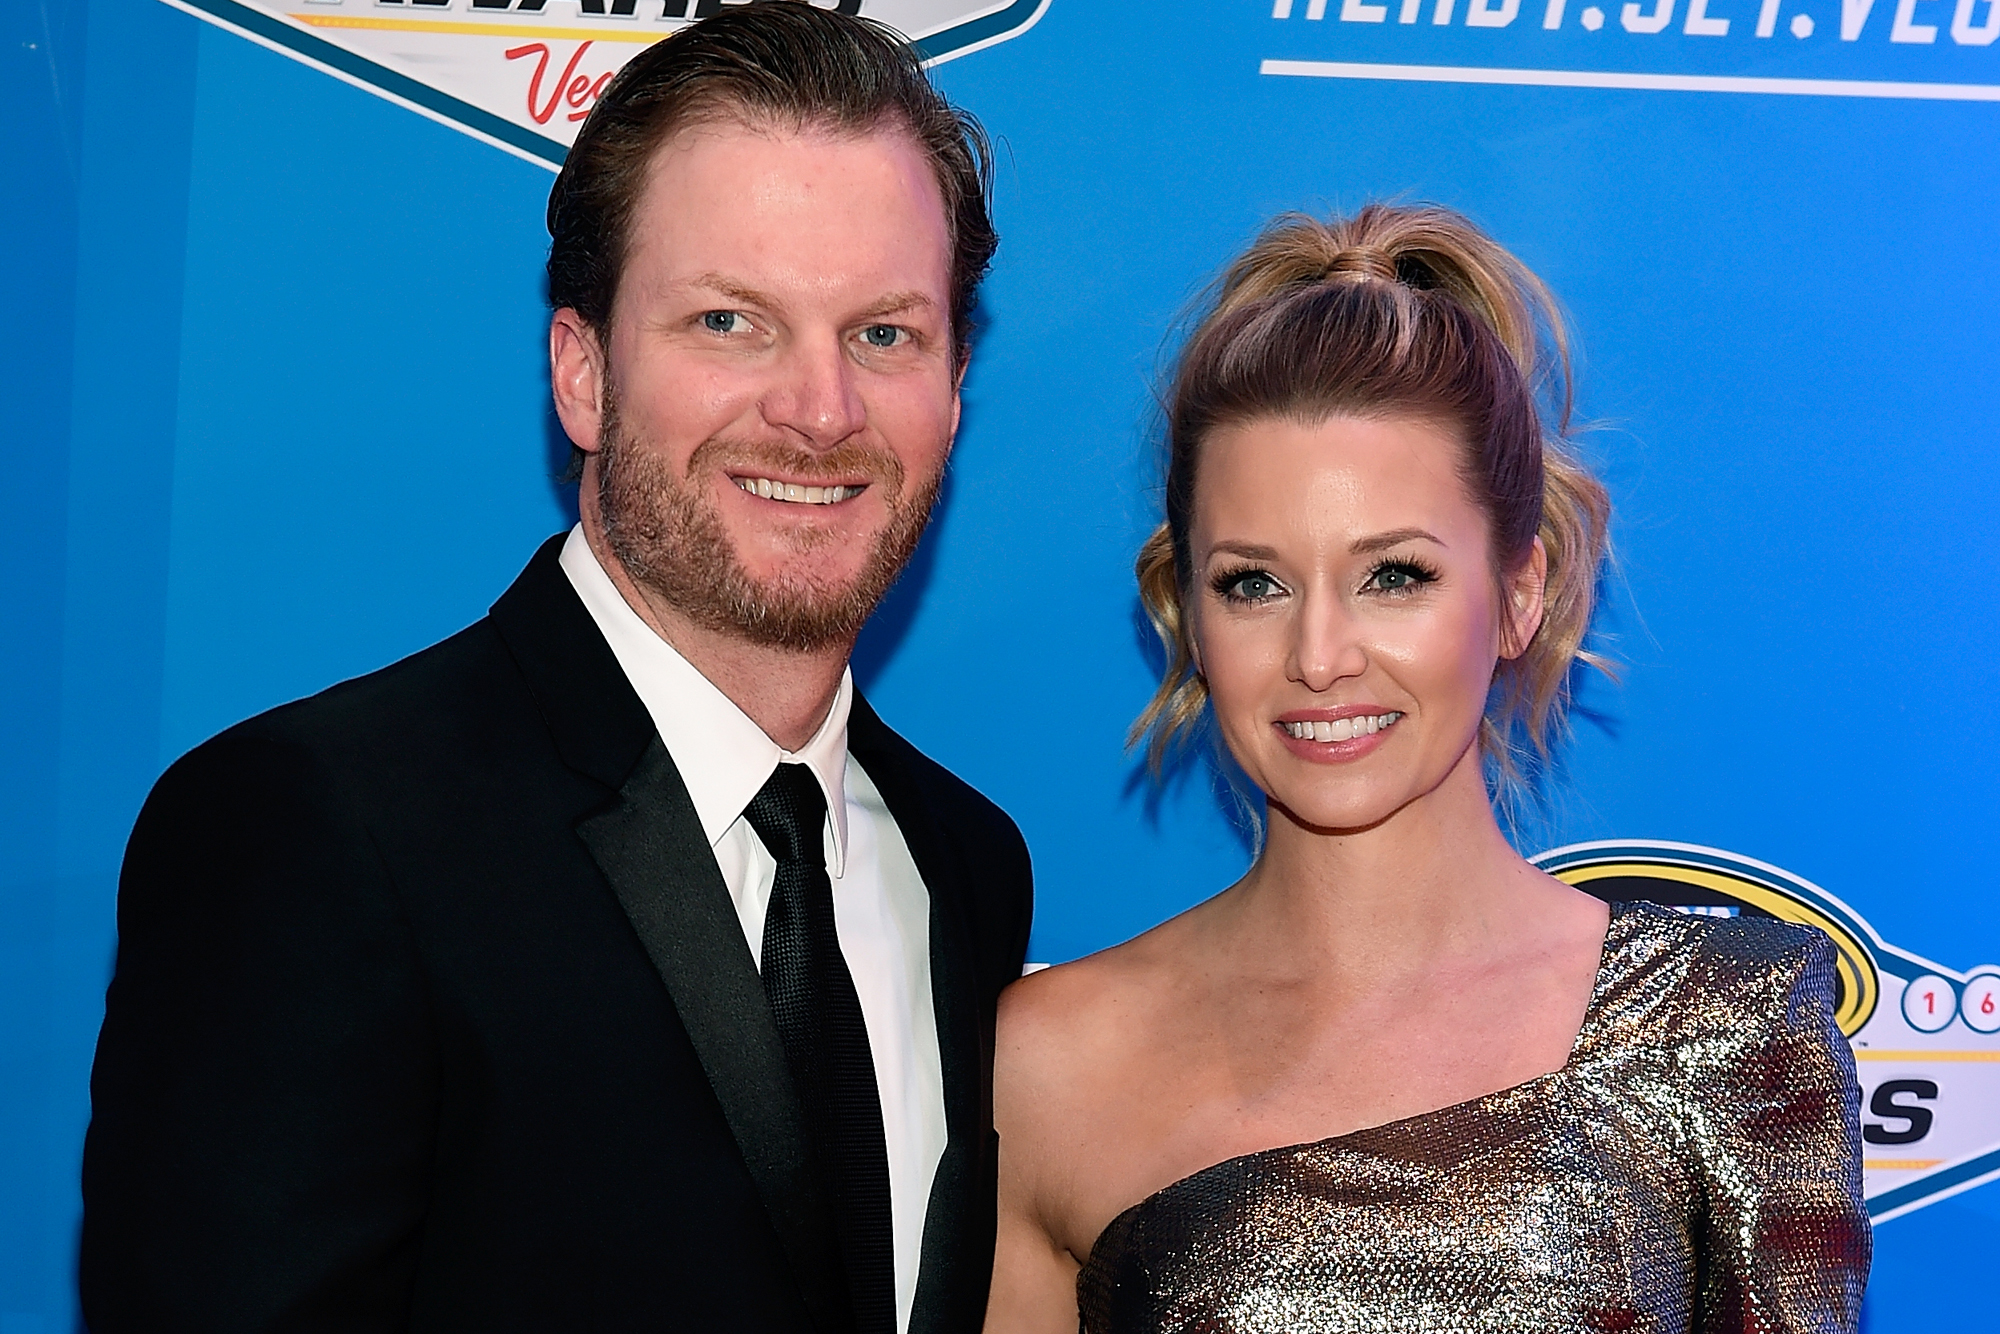 Dale Earnhardt Jr. and wife expecting first child Page Six